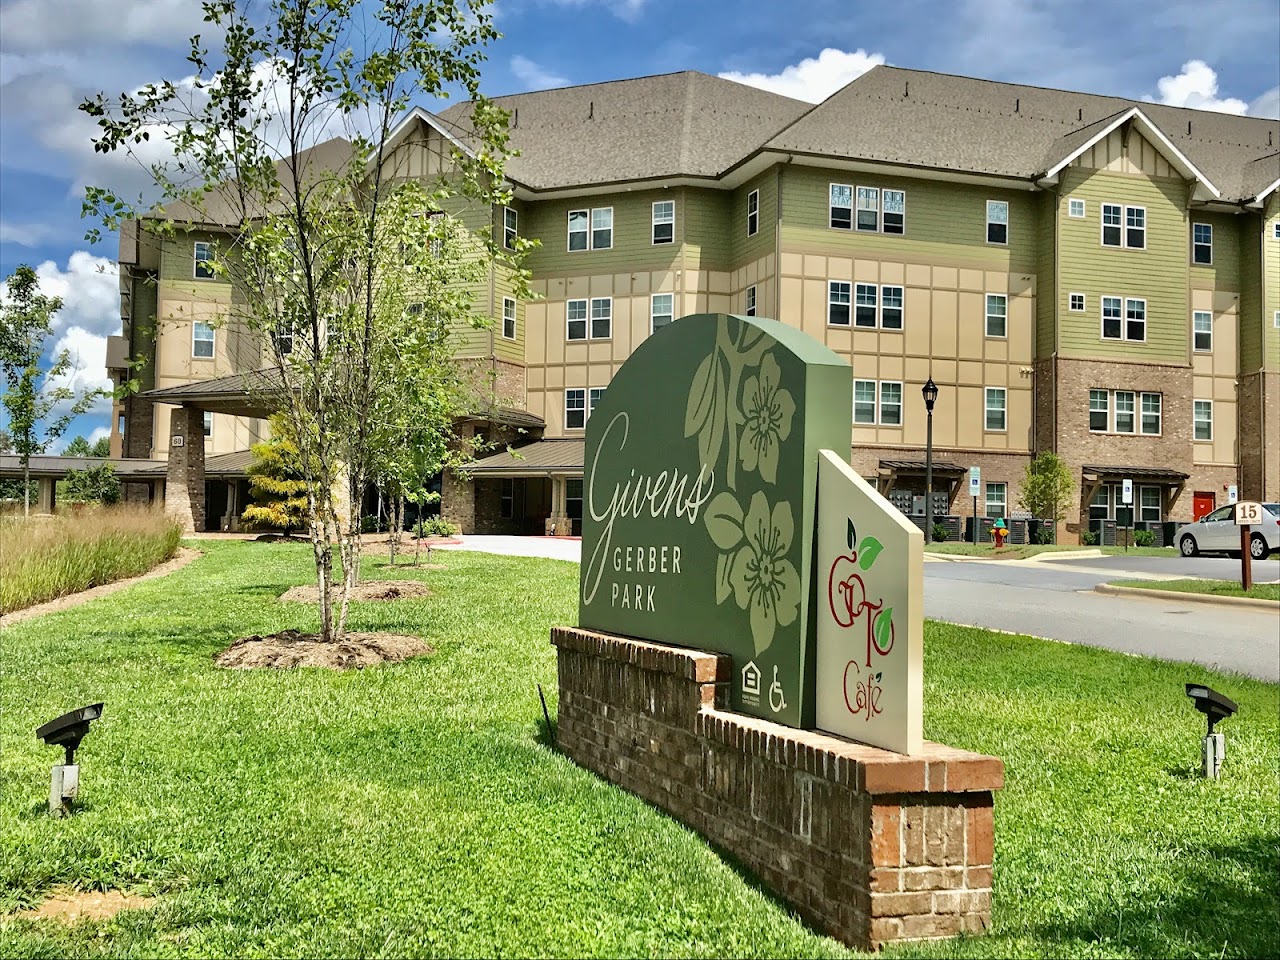 Photo of GIVENS GERBER PARK. Affordable housing located at 40 GERBER ROAD ASHEVILLE, NC 28803